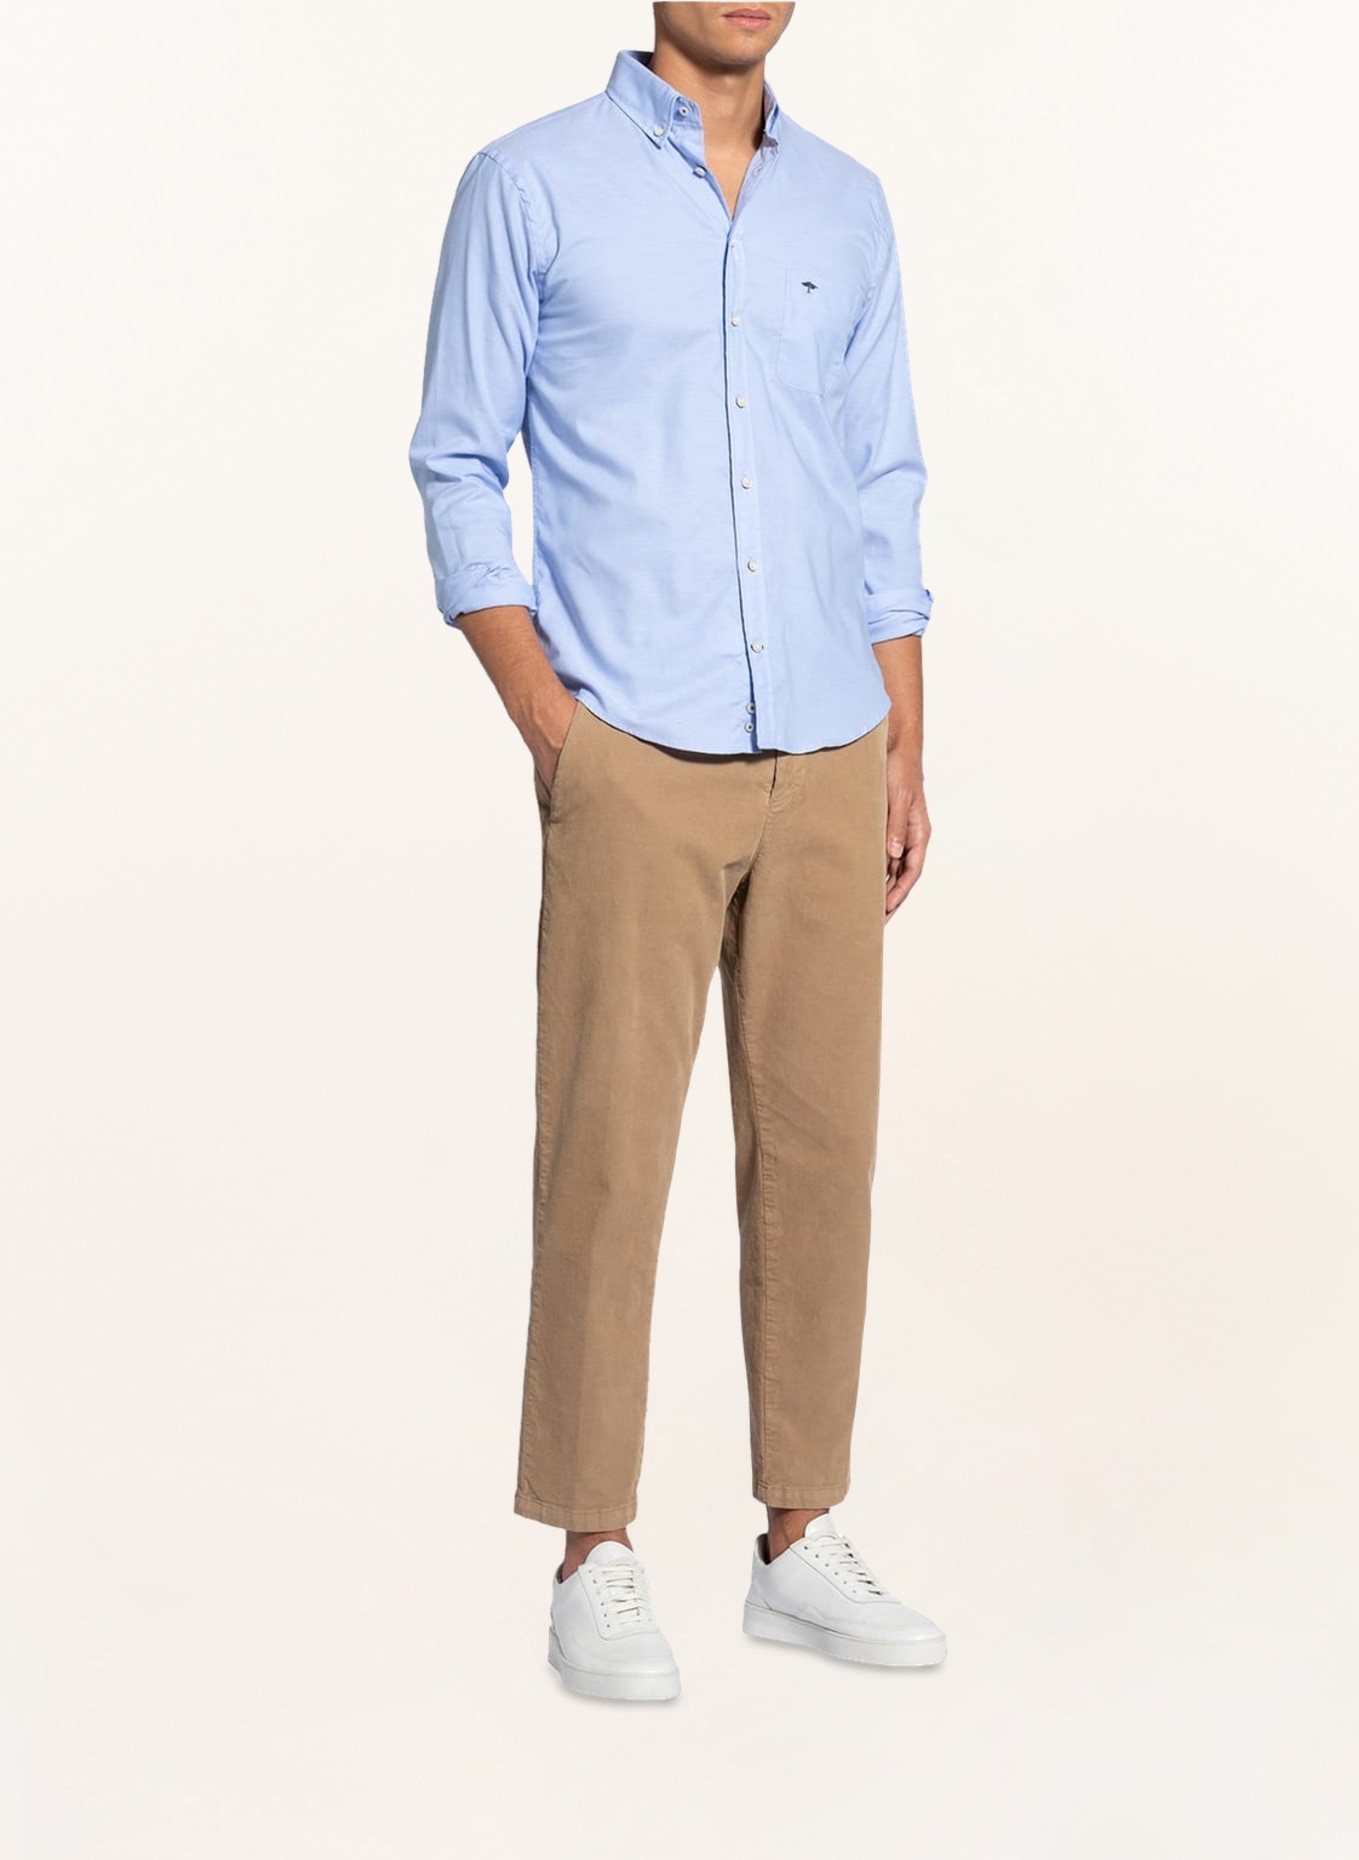 FYNCH-HATTON Shirt casual fit in blue light